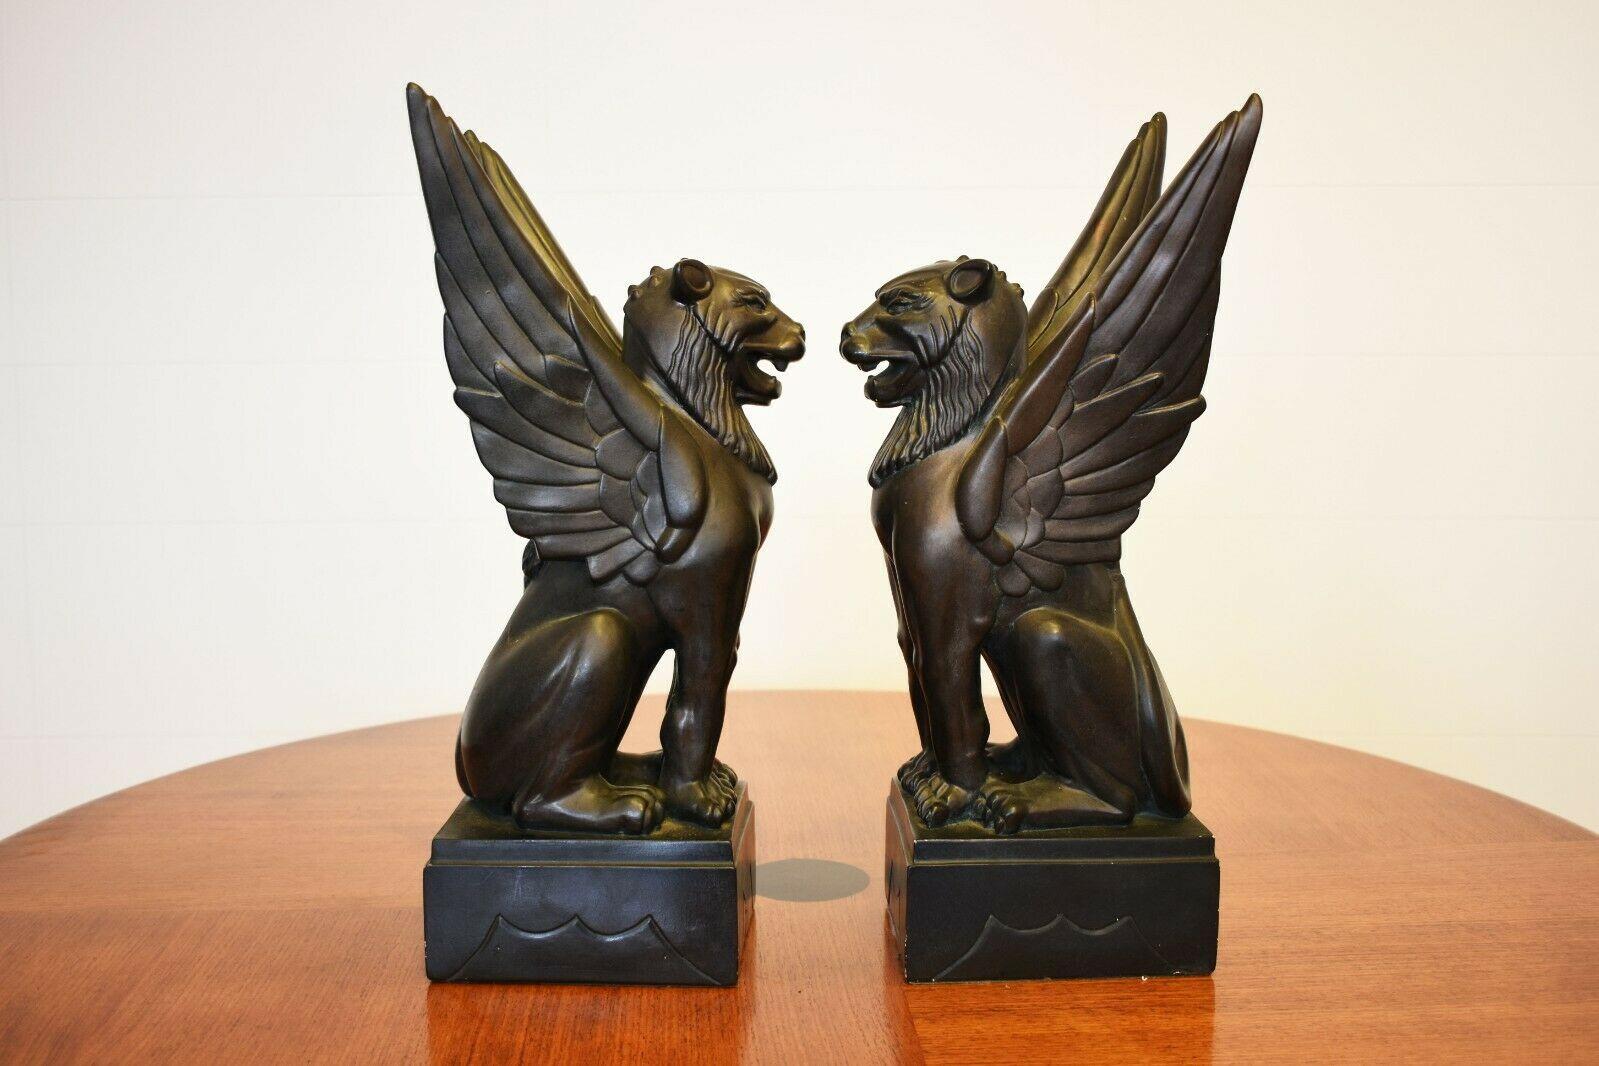 1990s rare pair of winged lion gargoyles

Made from ceramic, these winged lion gargoyles are a super interesting decorative piece, adding a Gothic Revival feel to your space.

About the designer:
Austin was founded in 1952 in Brooklyn, N.Y., as